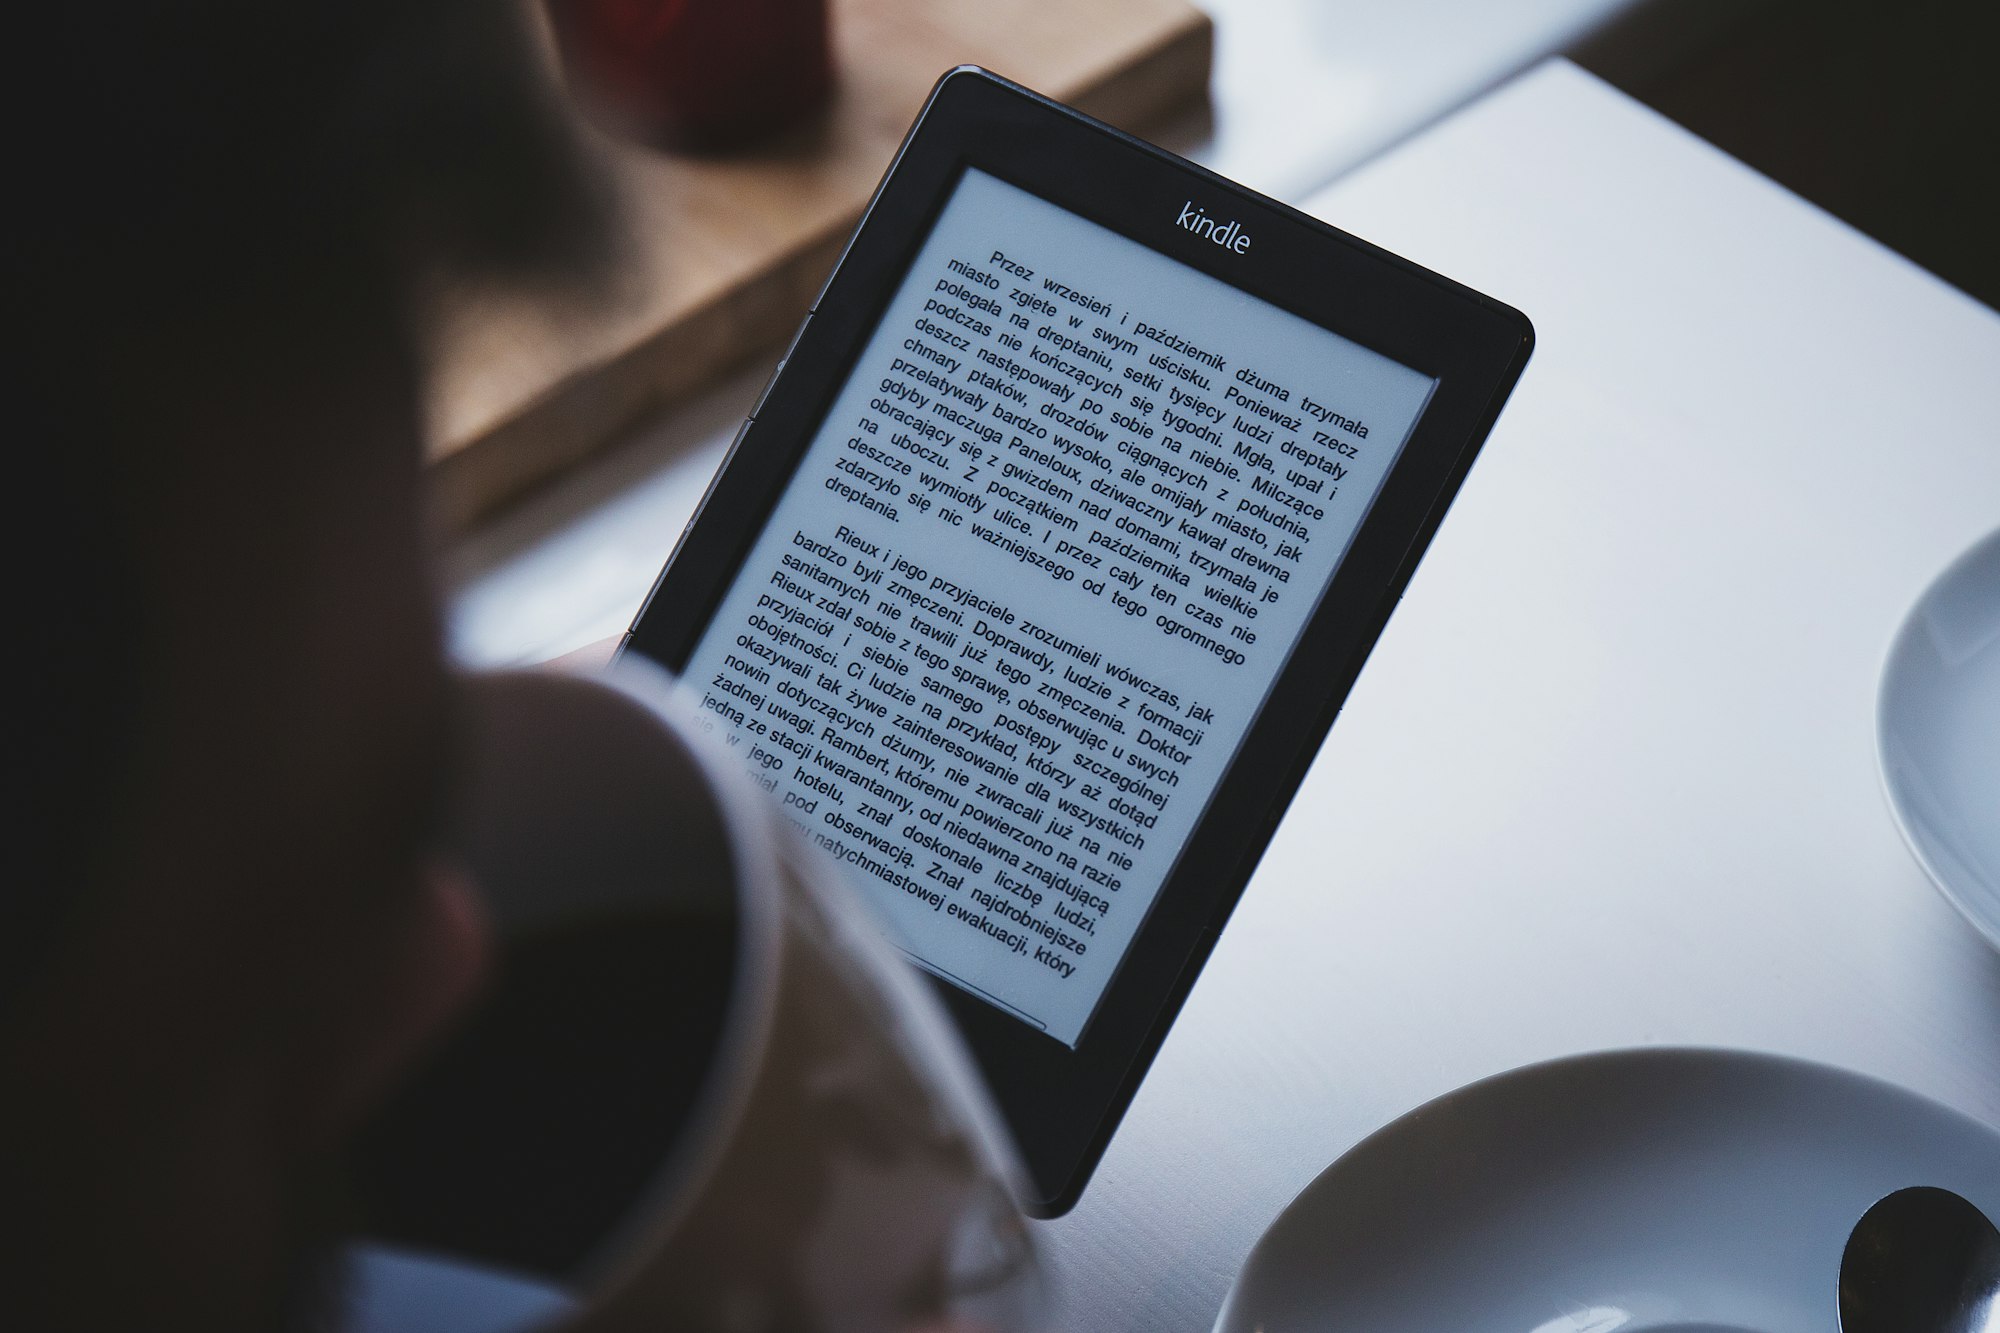 Ebook rise may be slower than many think